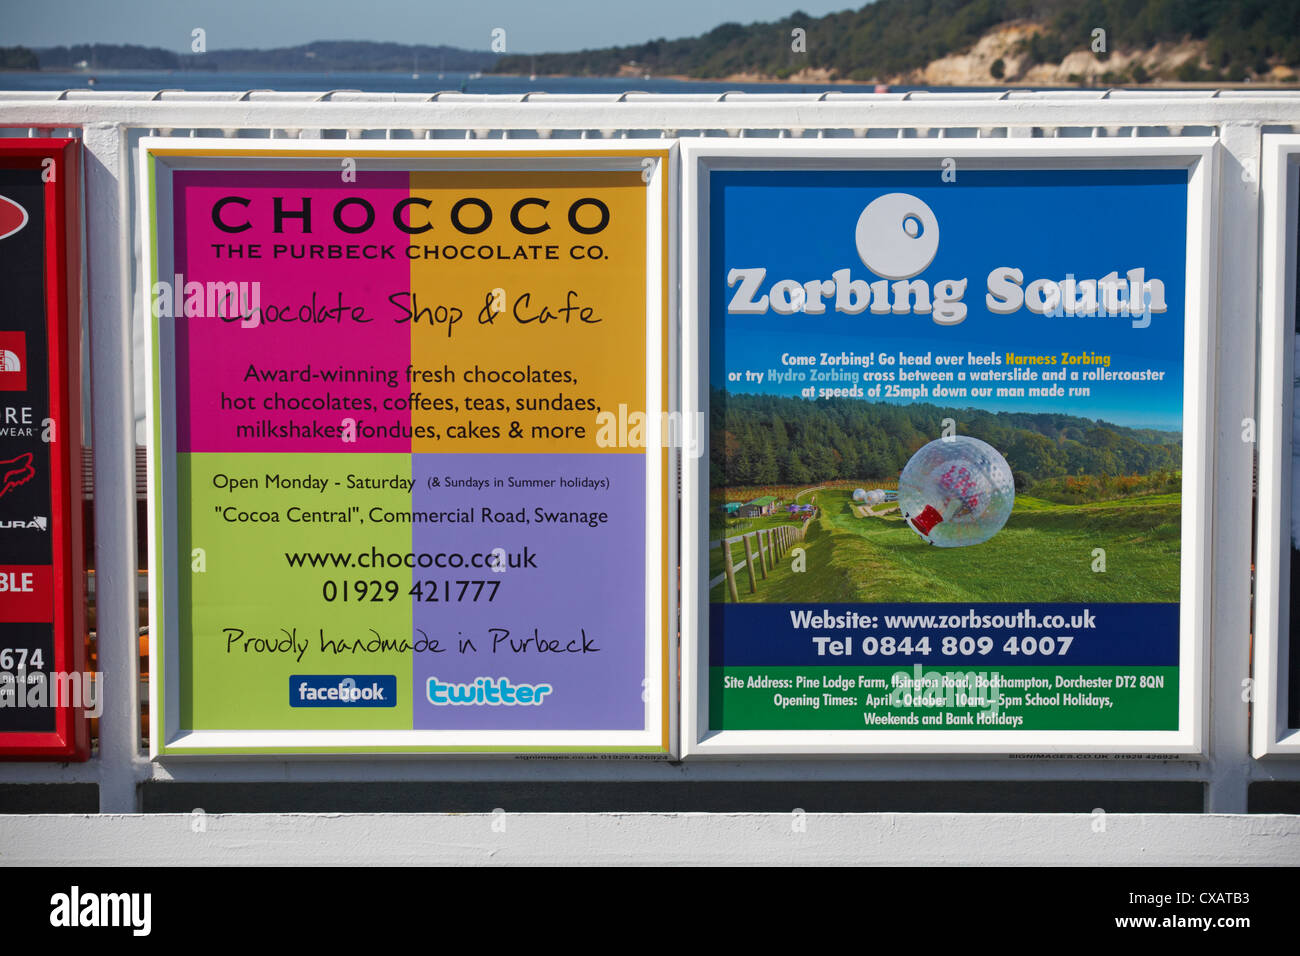 Advertising boards for Chococo and Zorbing South on Sandbanks to Studland chain ferry Stock Photo